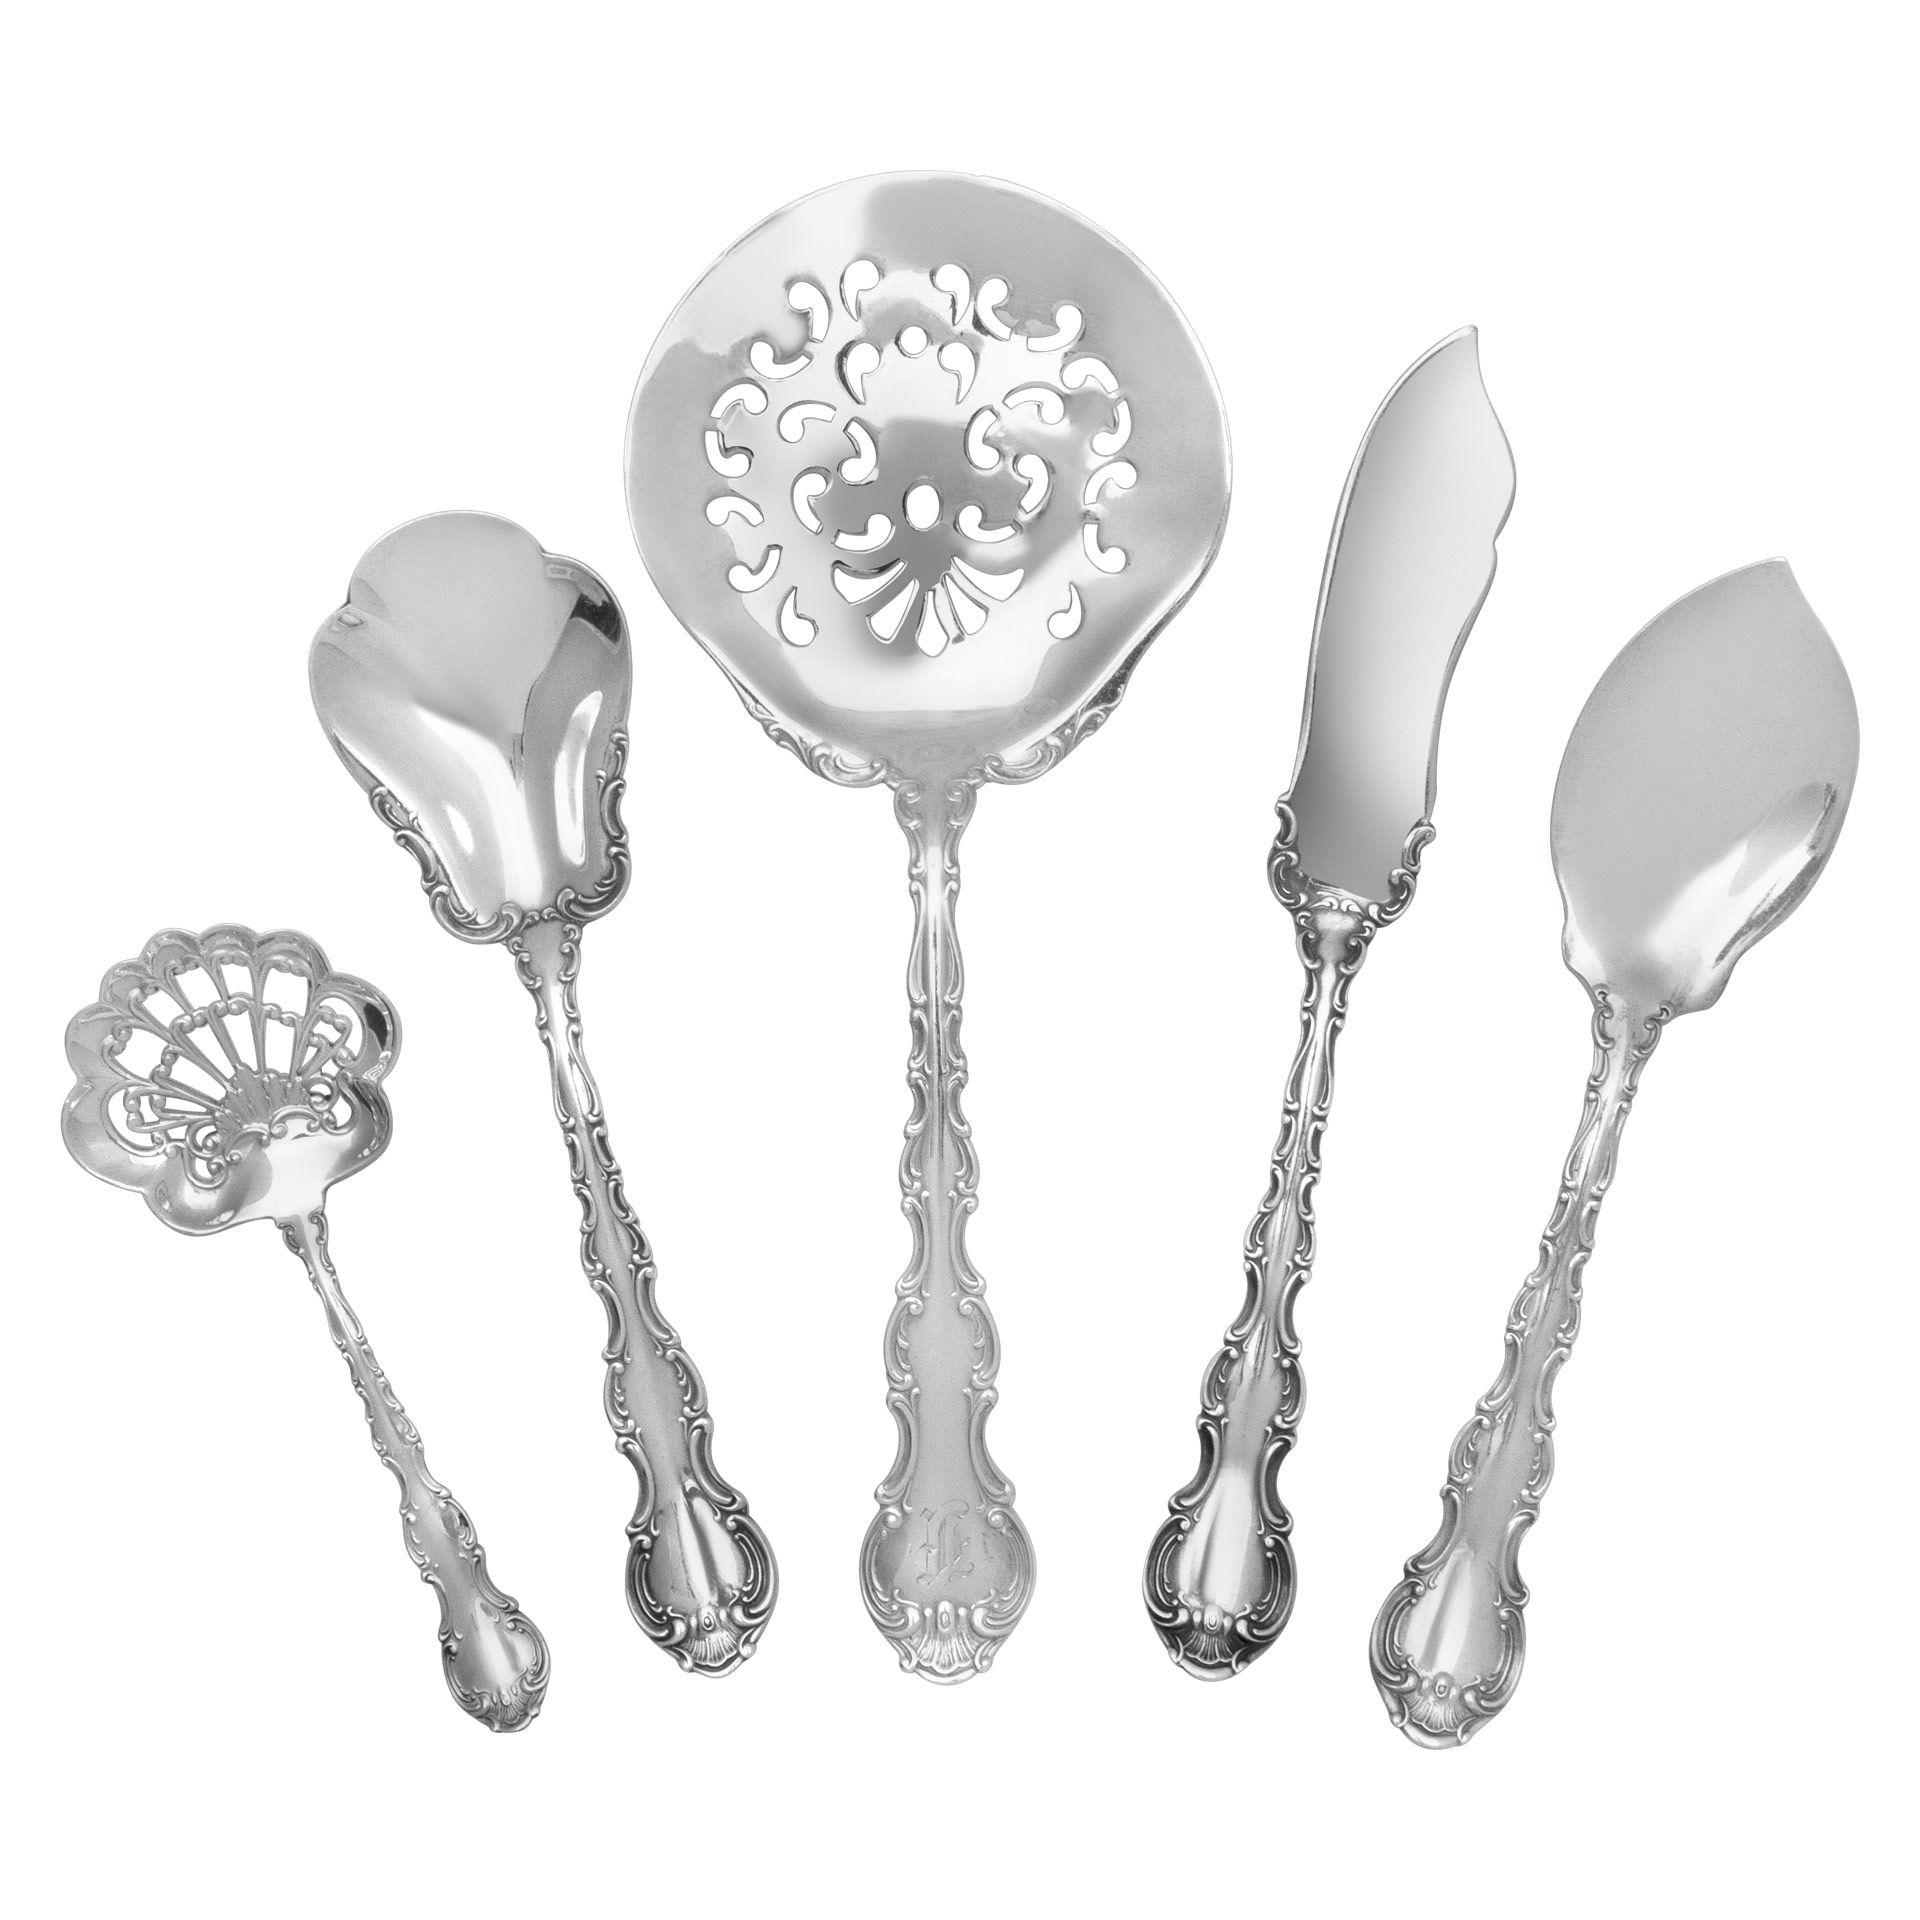 SUPER SIZED "Strasbourg" Sterling Silver Flatware set patented by Gorham in  1897-  8 Place setting for 12 (plus) with 18 serving pieces- Over 3300 grams sterling silver. image 4